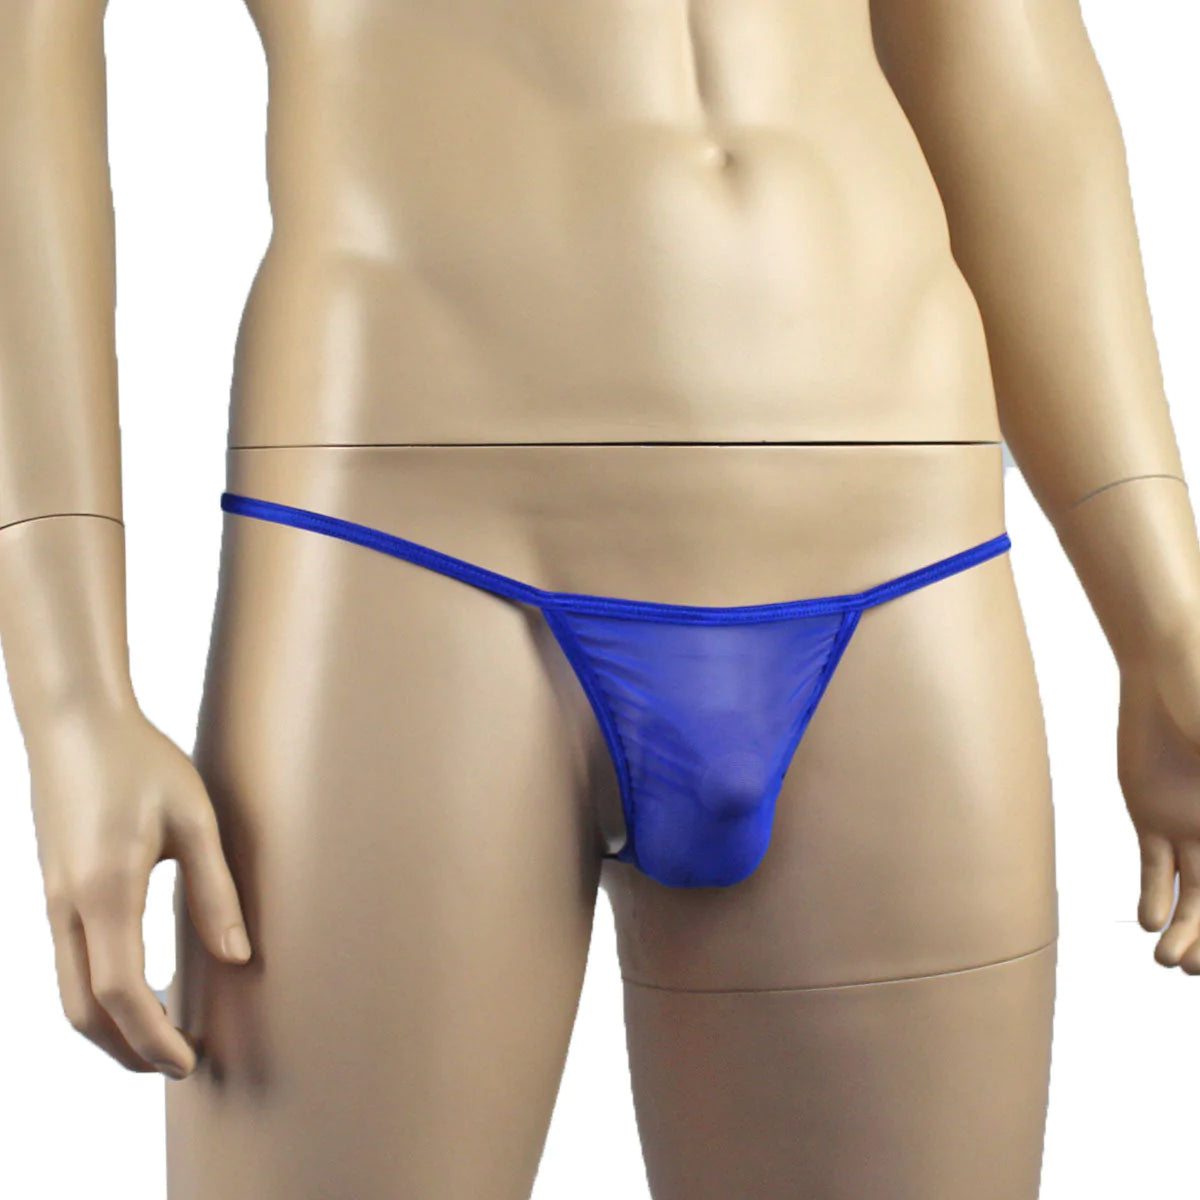 SALE - Mens Vicky See Through Mesh Micro Mini Pouch G string Blue